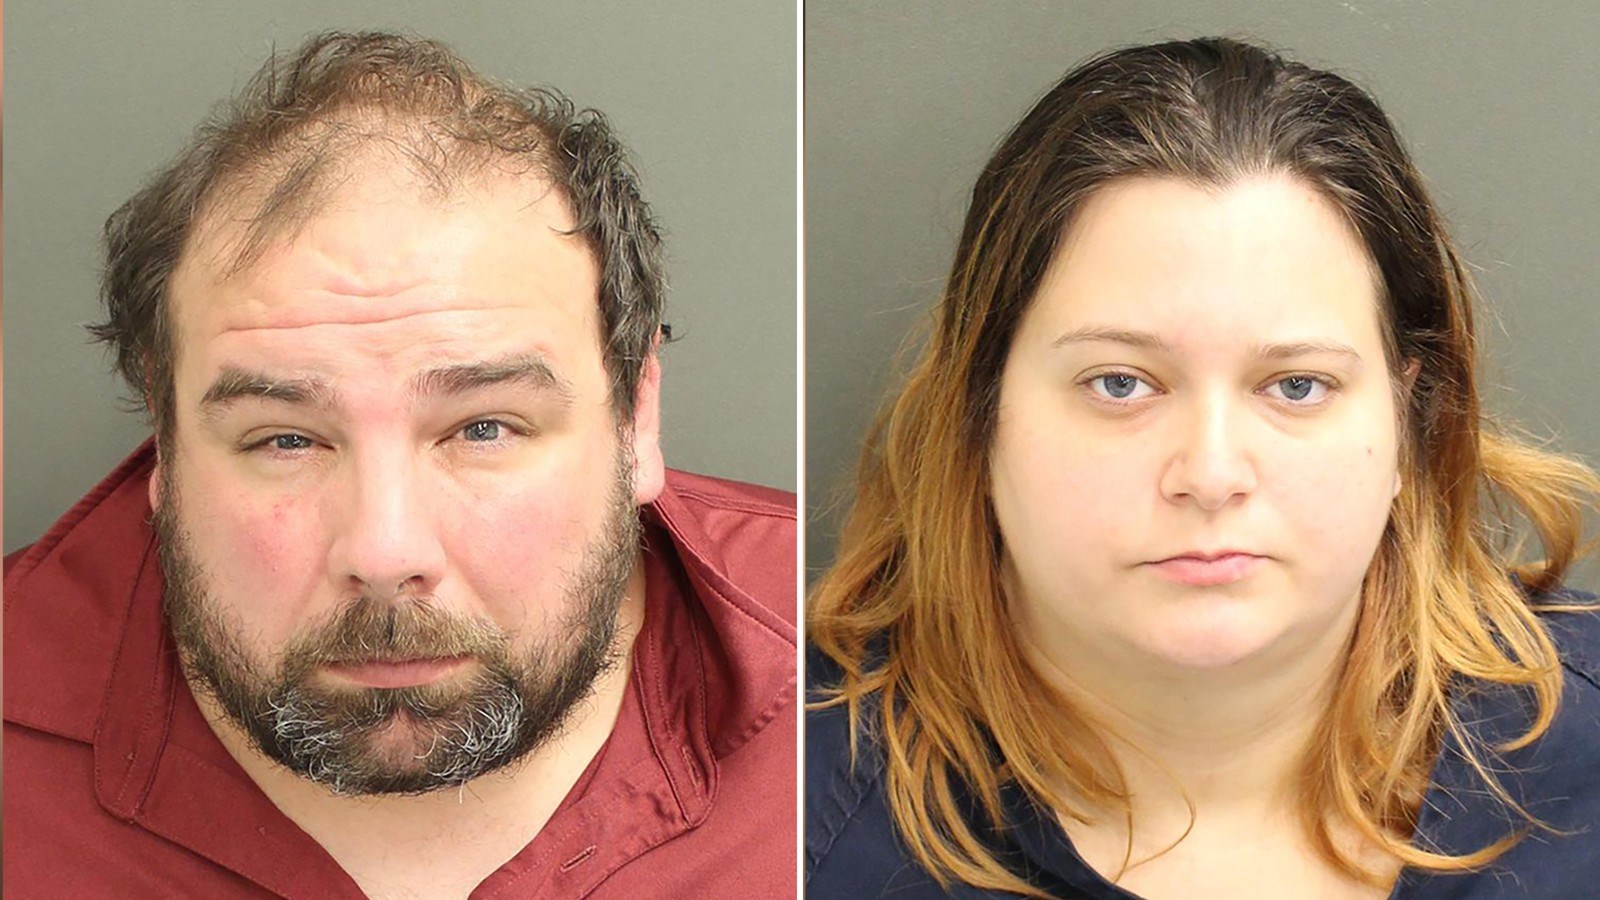 After police arrived and questioned the child, Timothy Wilson, left, was arrested at the restaurant, and the boy's mother, Kristen Swann, was taken into custody days later. (Orlando police)